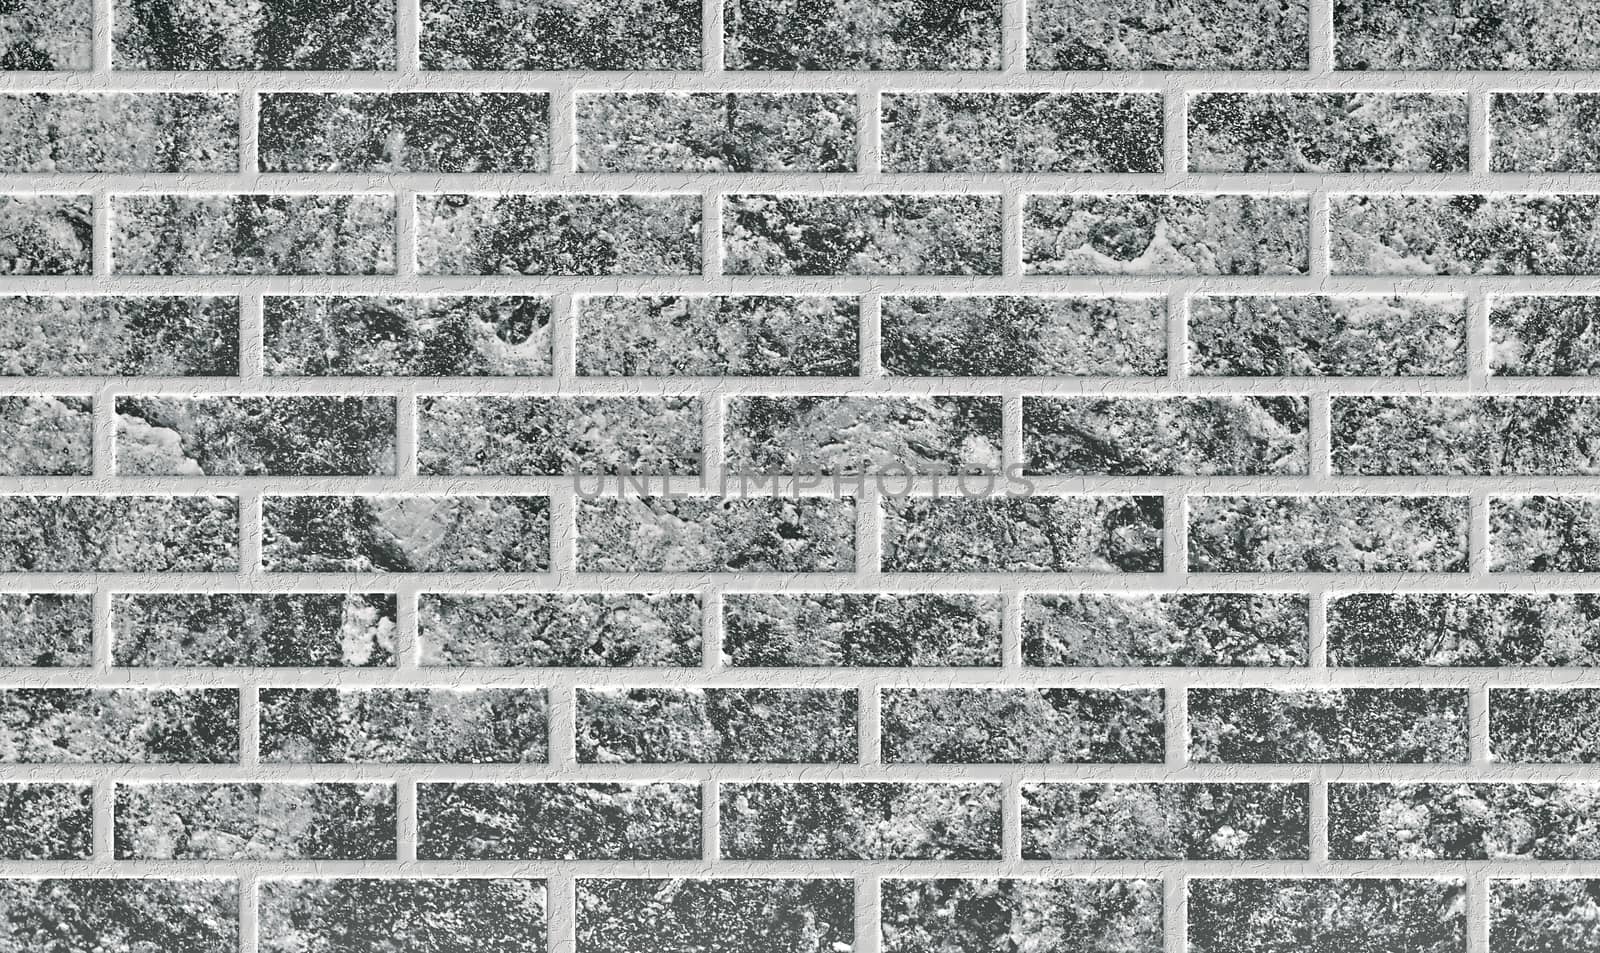 Brick wall illustration. Black and white textured background. Pattern of decorative wall surface